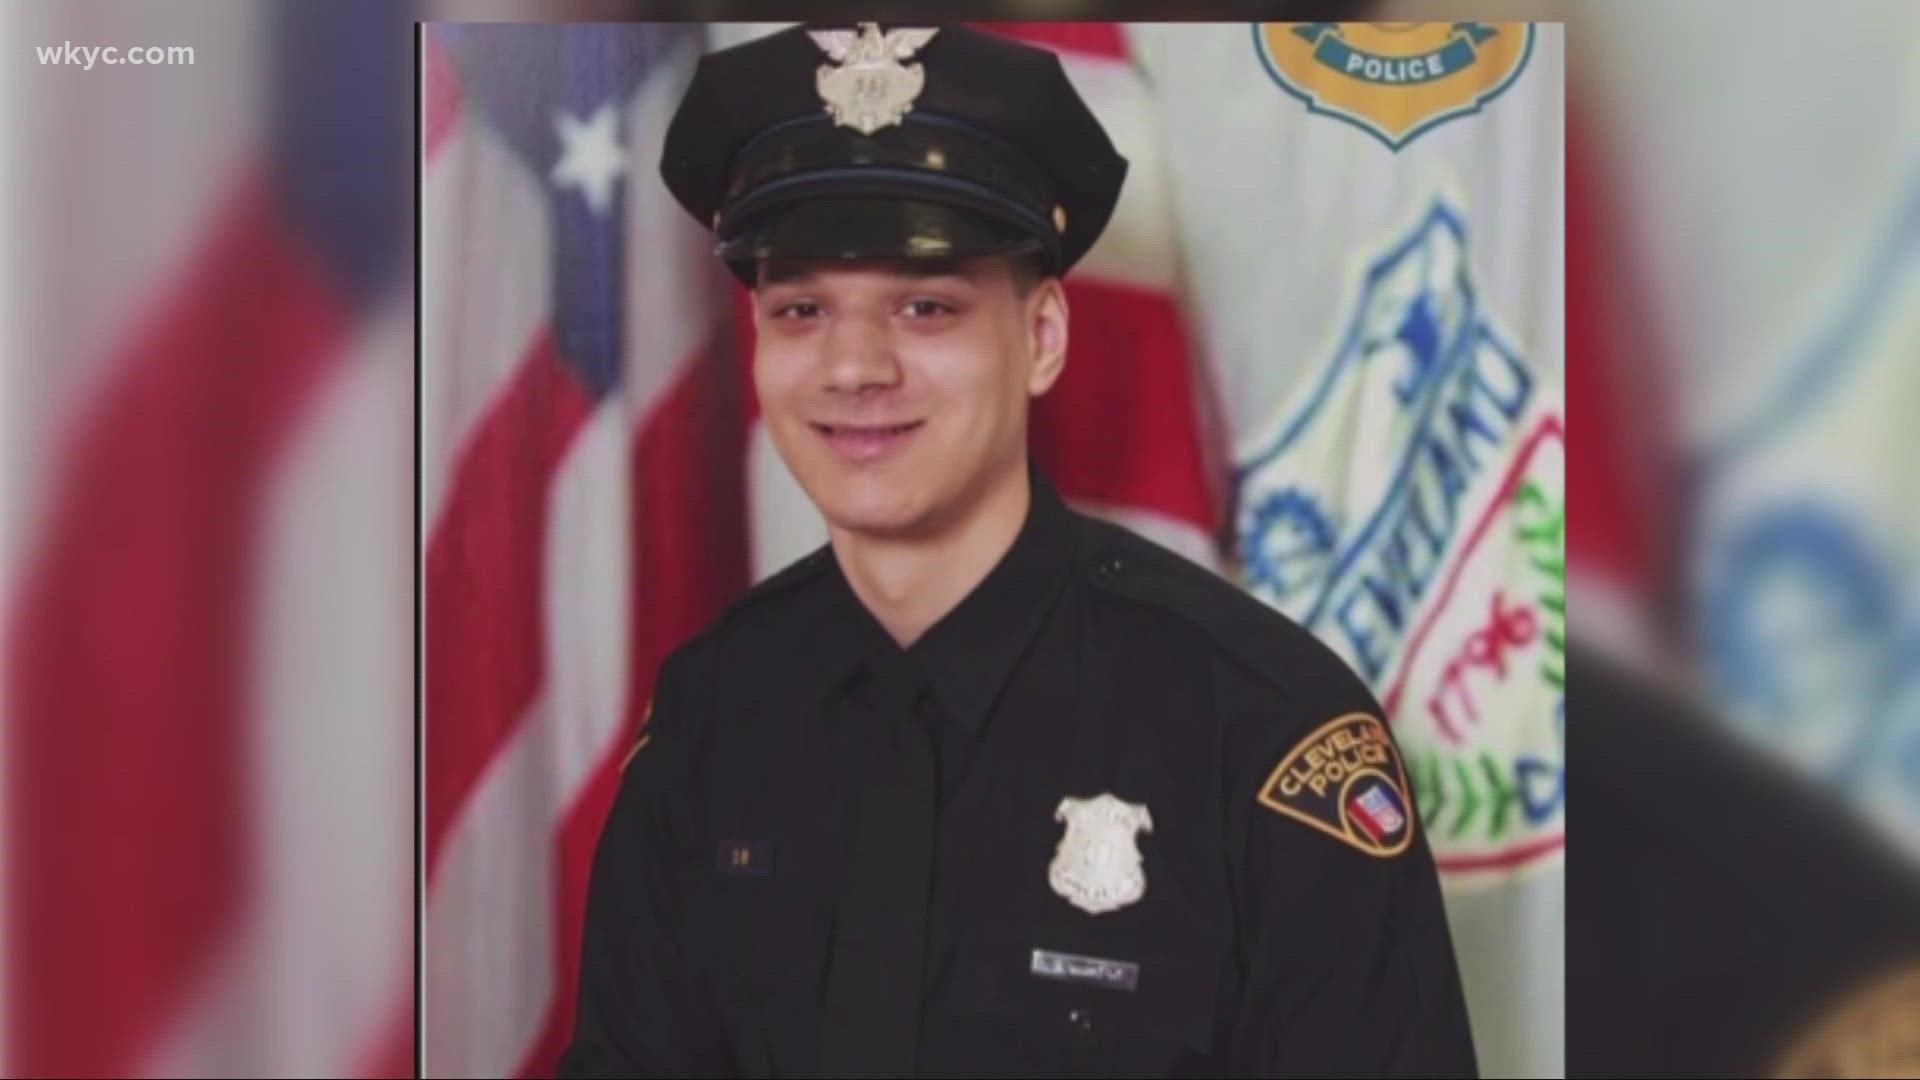 The Cleveland Division of Police has released video showing the arrest of an 18-year-old woman who has since been charged with the murder of Officer Shane Bartek.